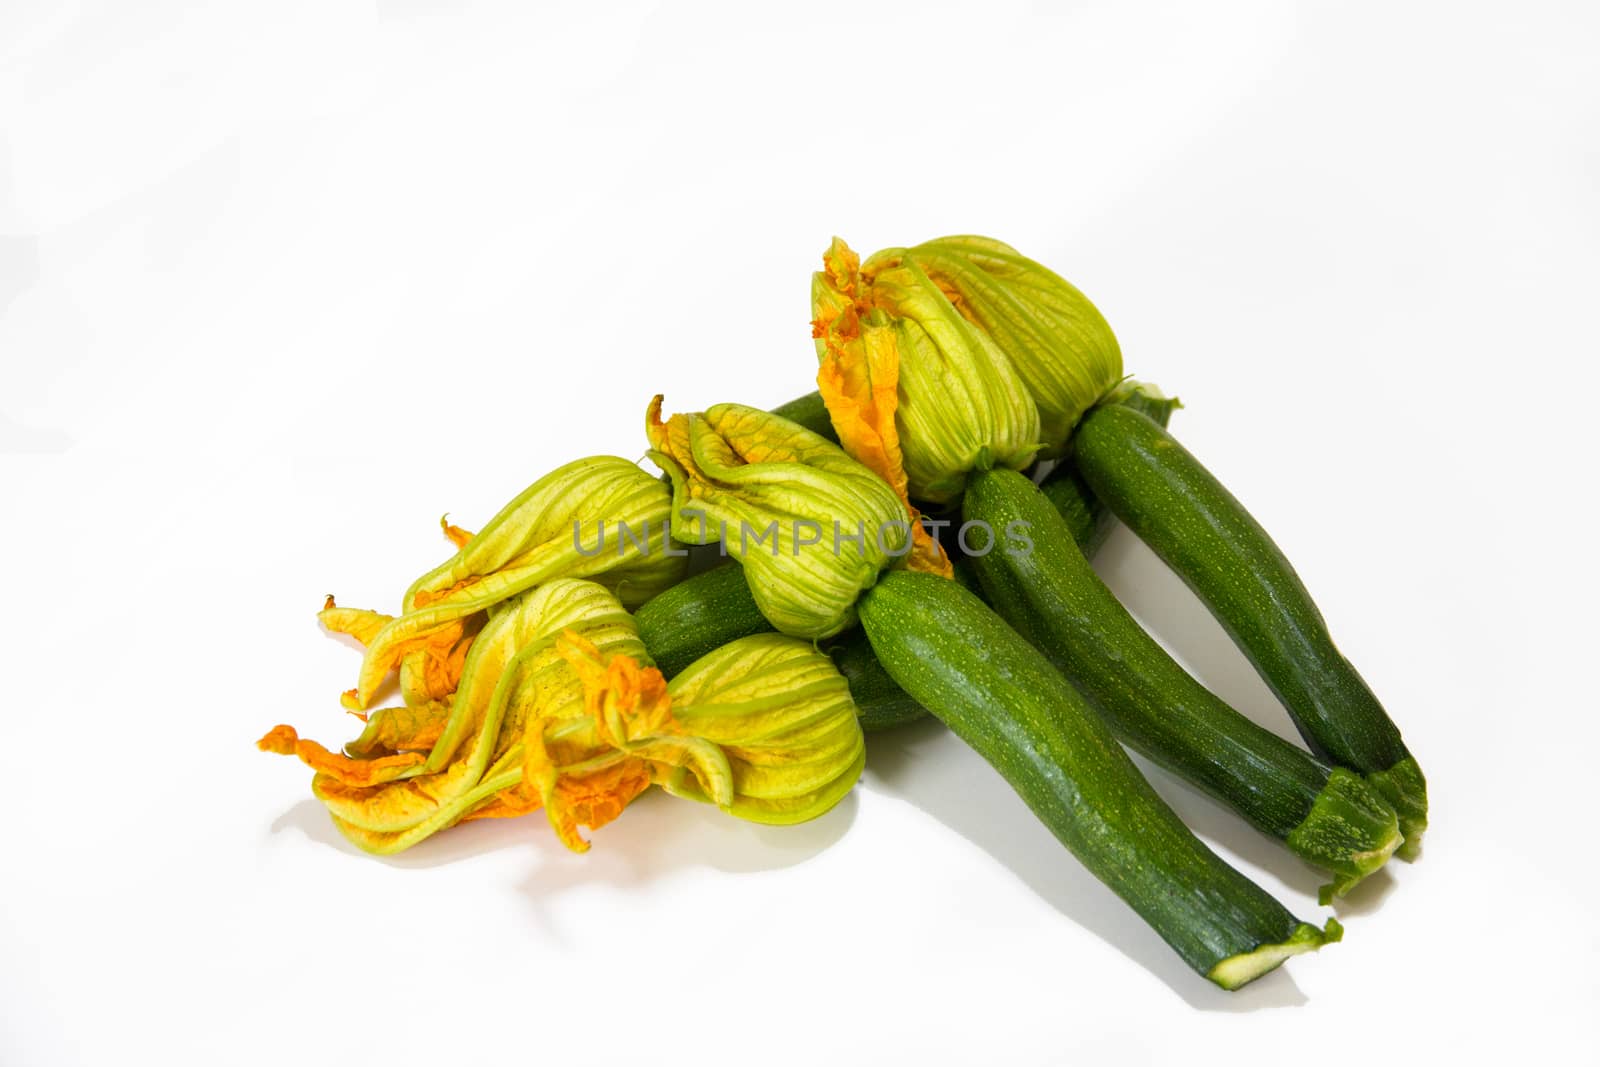 Arrangement of courgettes (zucchinis) on a white background